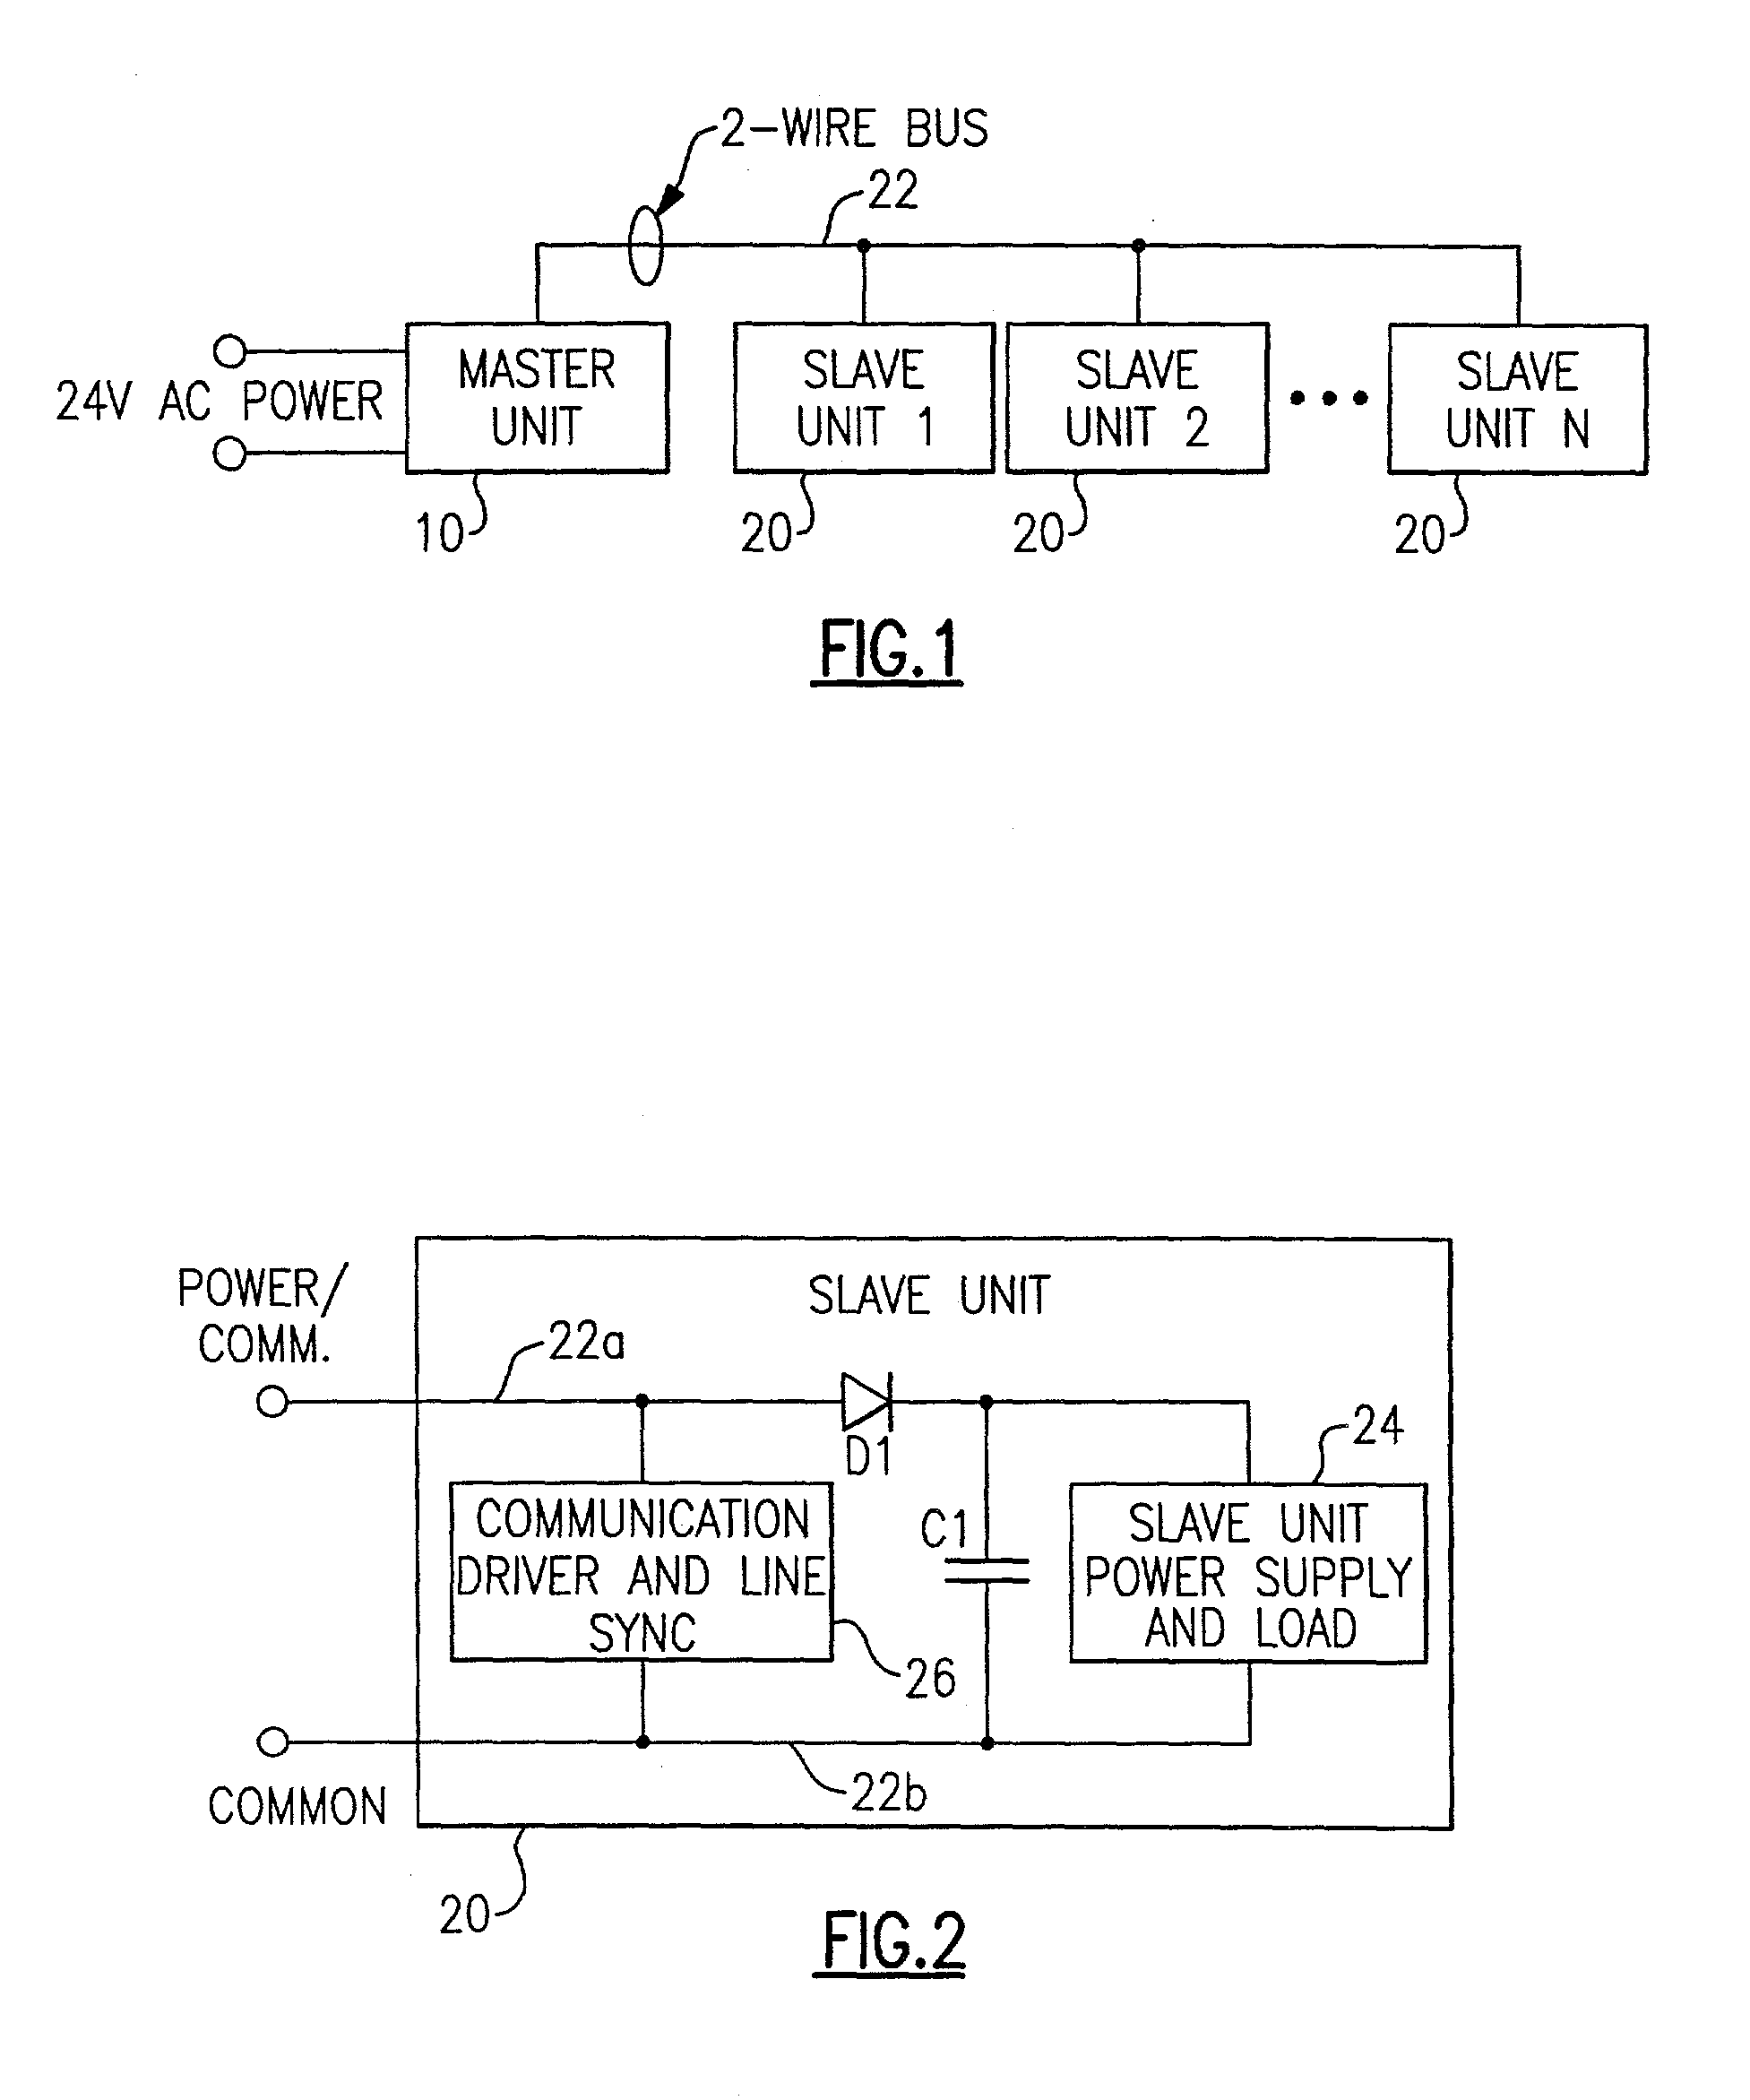 Method and apparatus for providing both power and communication over two wires between multiple low voltage AC devices